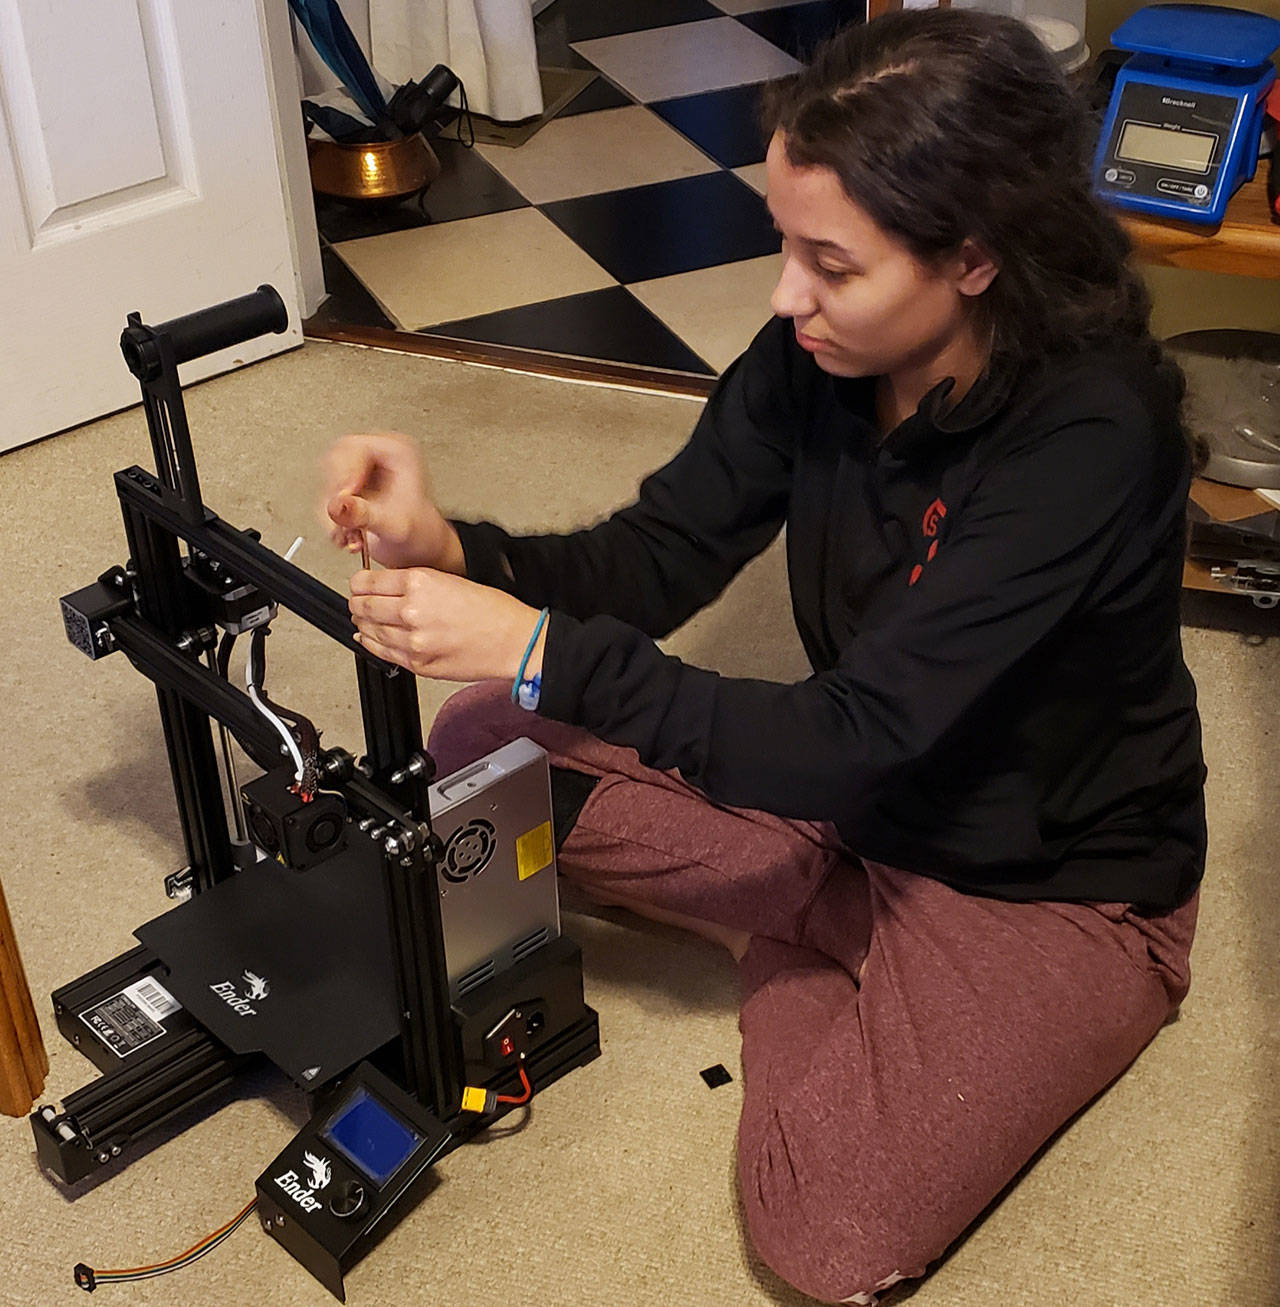 Spartronics leadership team member Merrill Keating uses a 3D printer she assembled during Spring Break to print ear protectors for masks being made for health care professionals and first responders. (Photo courtesy of Enrique Chee)